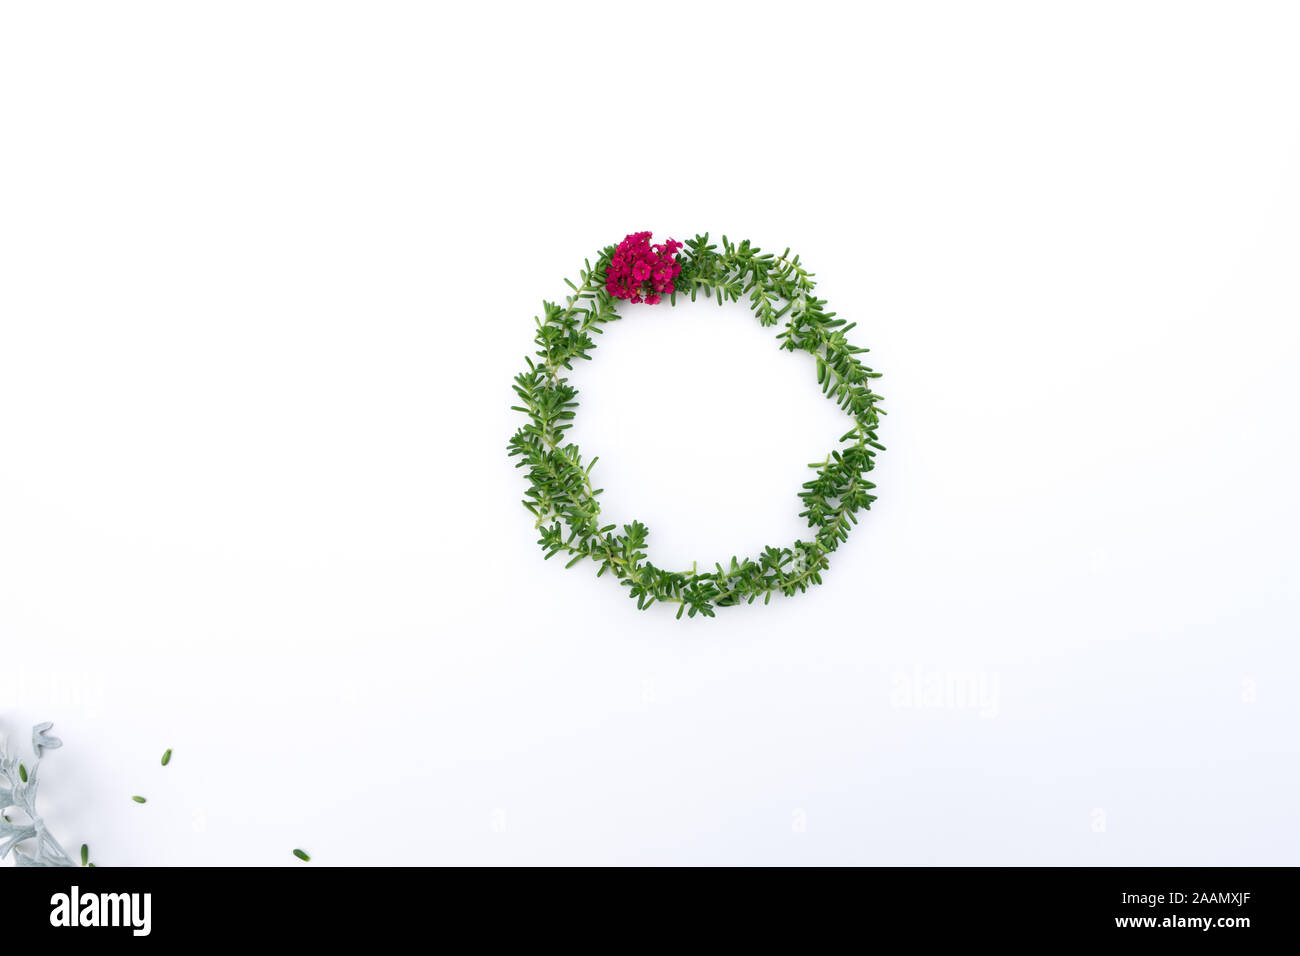 Abstract Christmas wreath with succulents and red yarrow on minimalist white background, creative flatlay, conceptual, room for copy, view from above Stock Photo